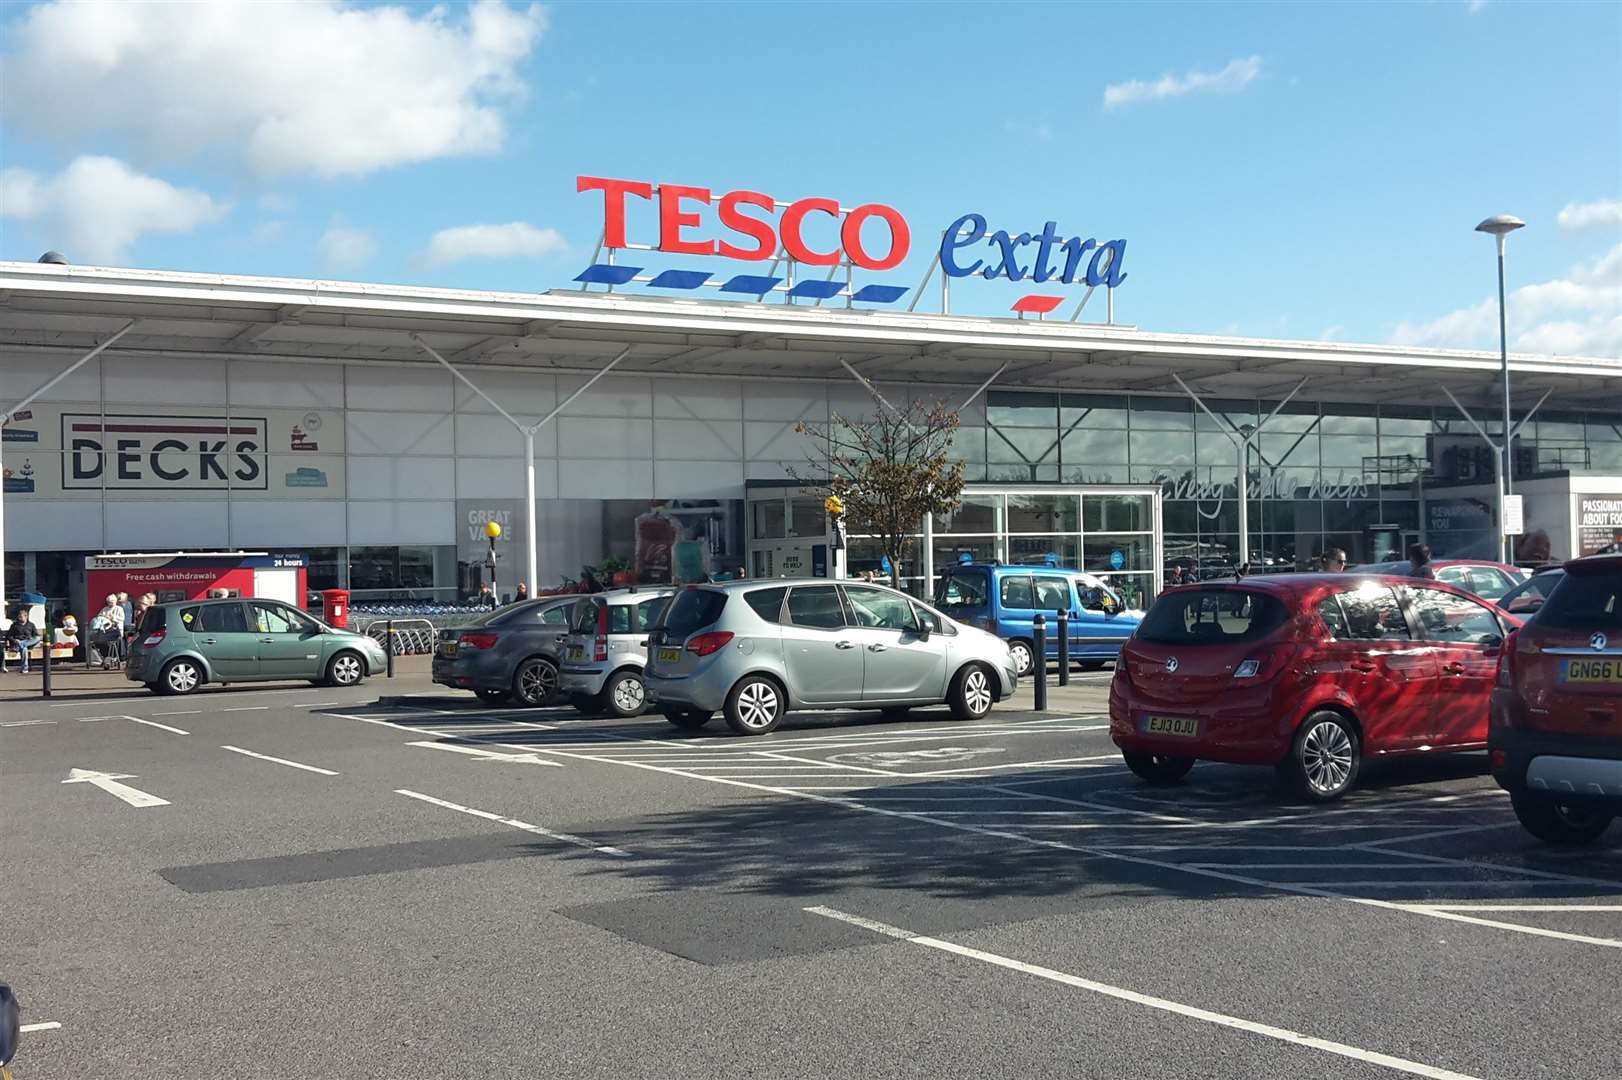 Tesco Extra in Broadstairs